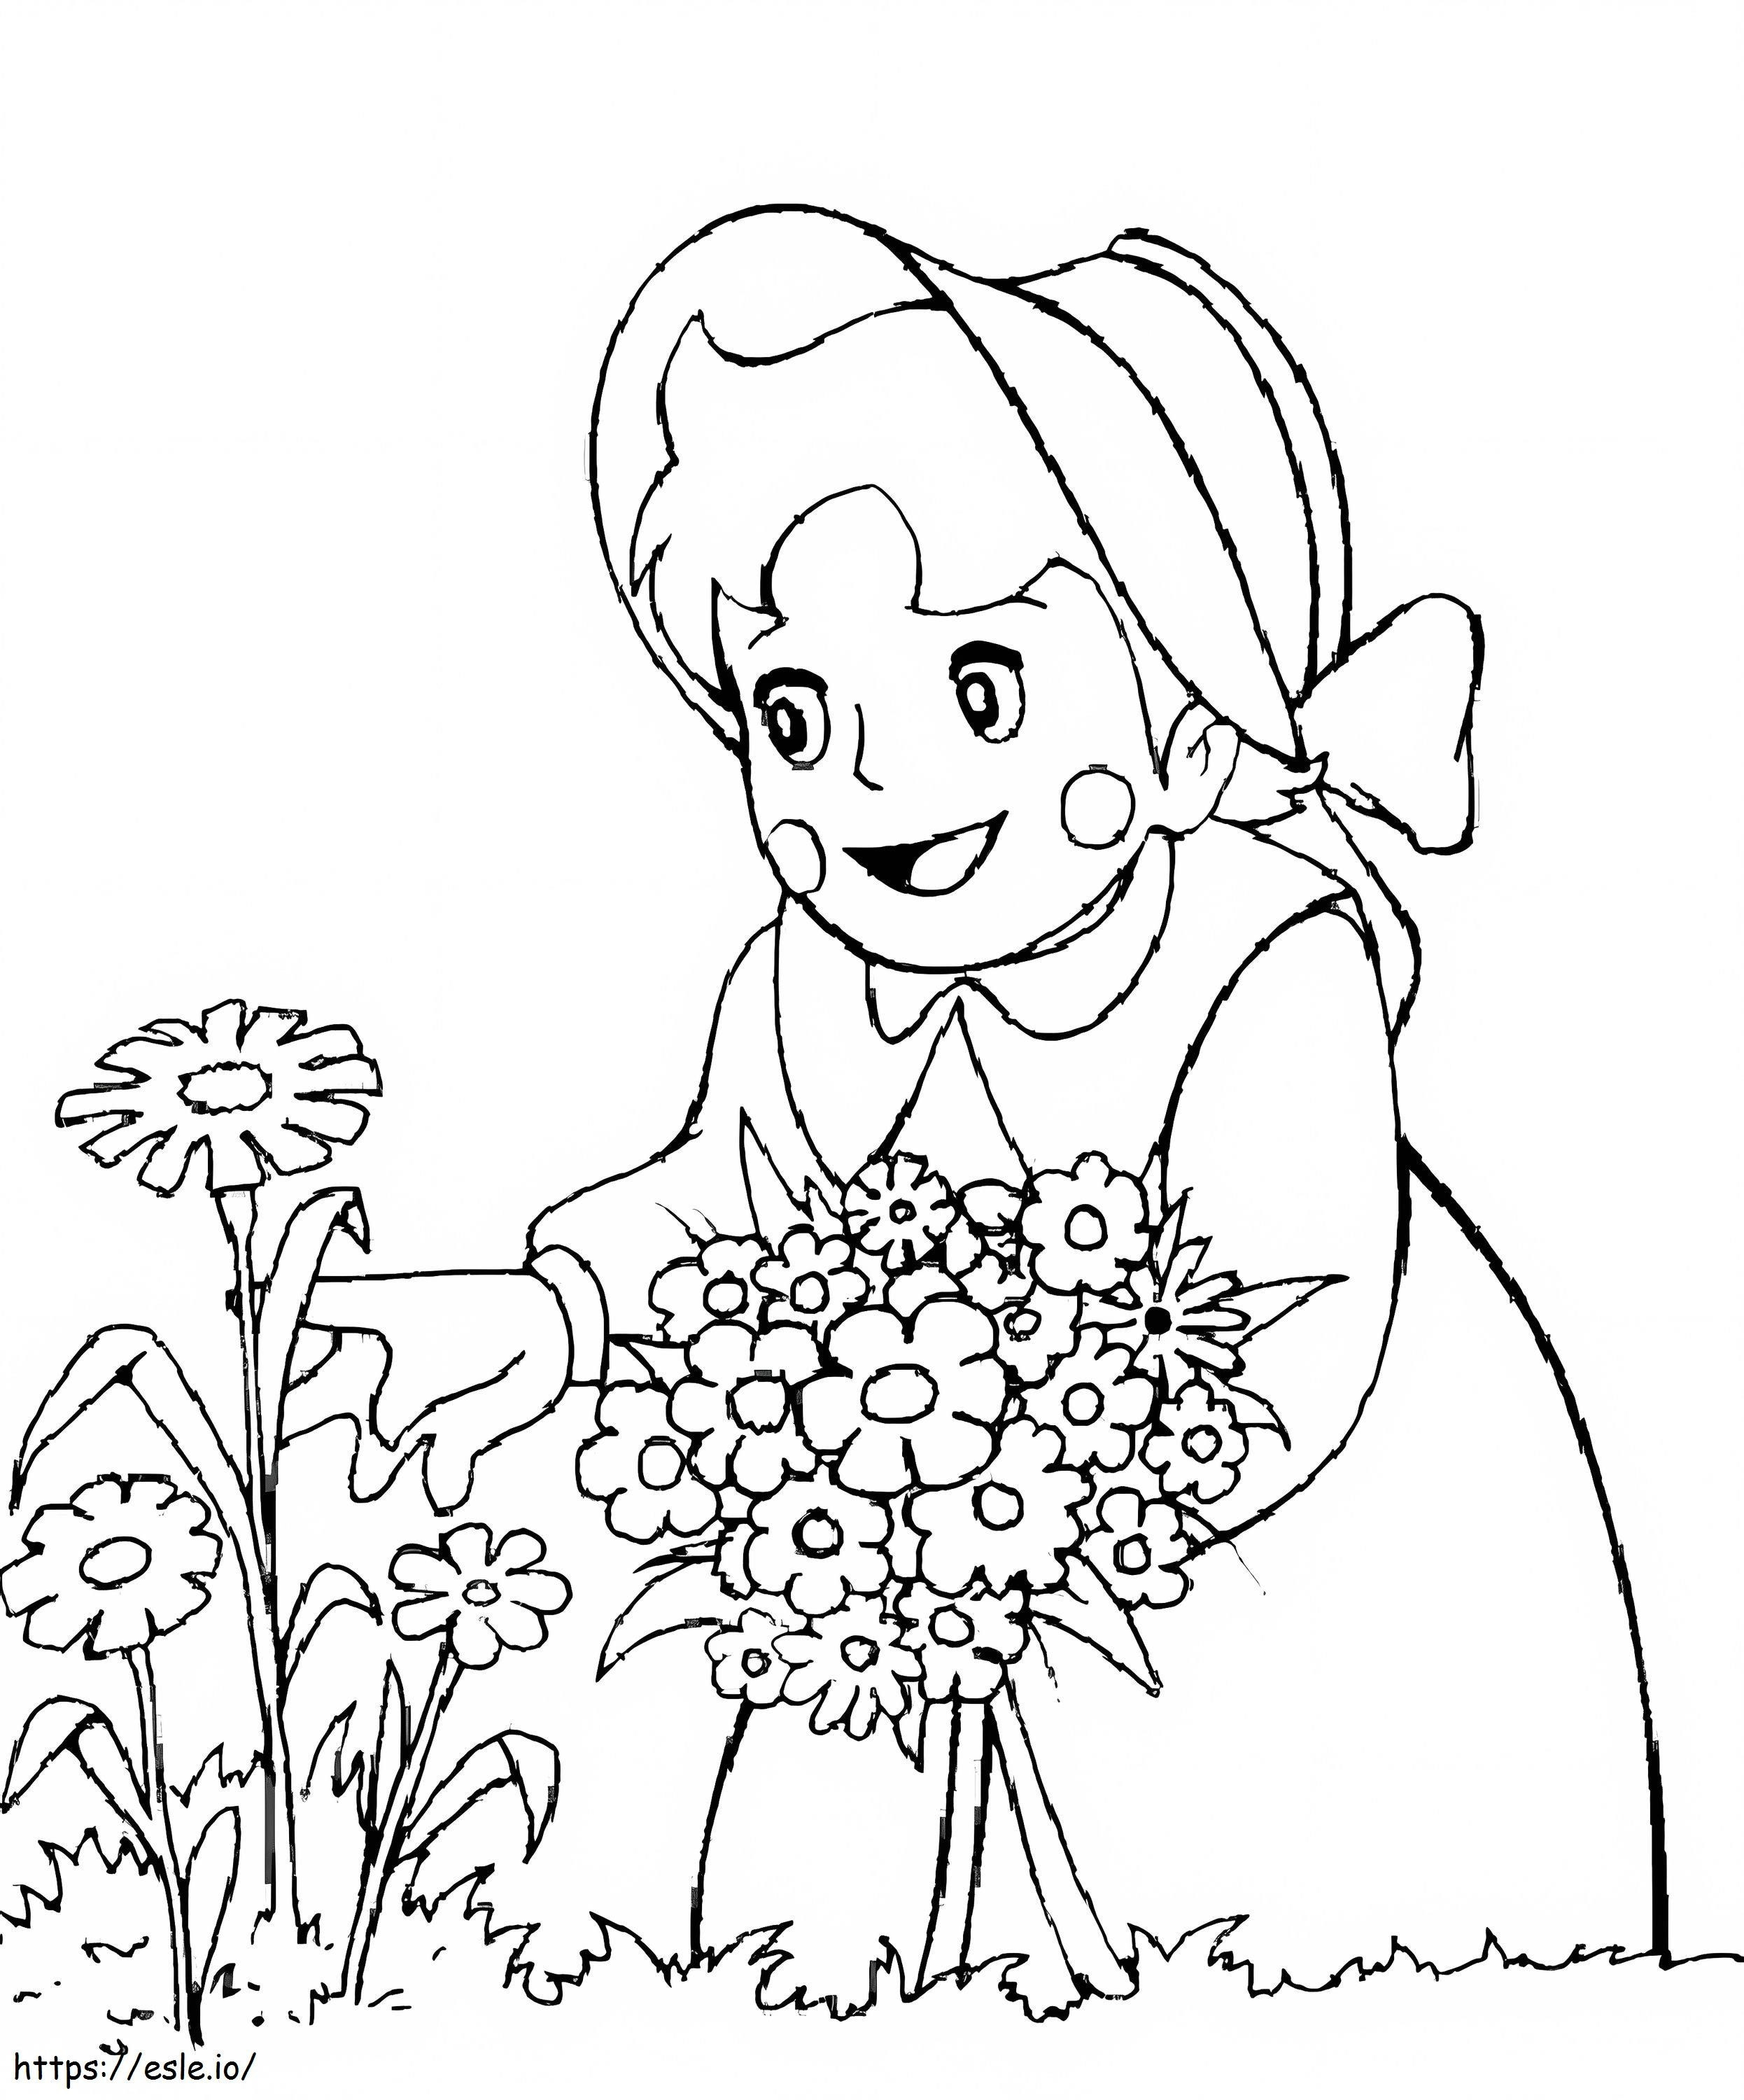 Heidi With Flowers coloring page